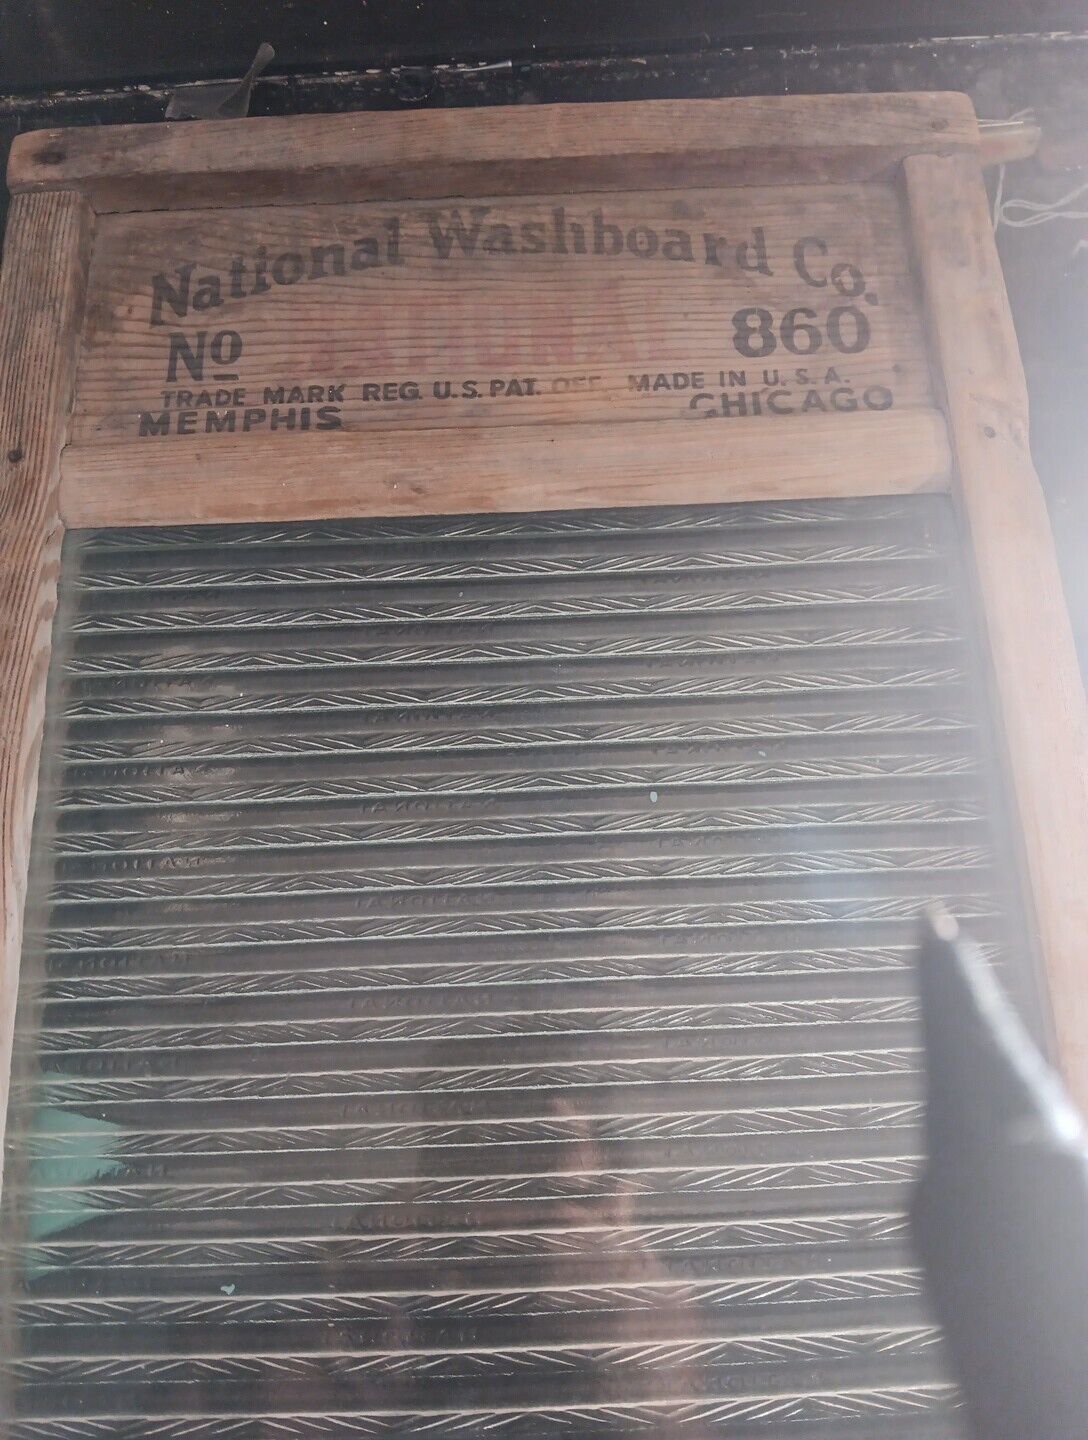 National Washboard Co. No.860 With 